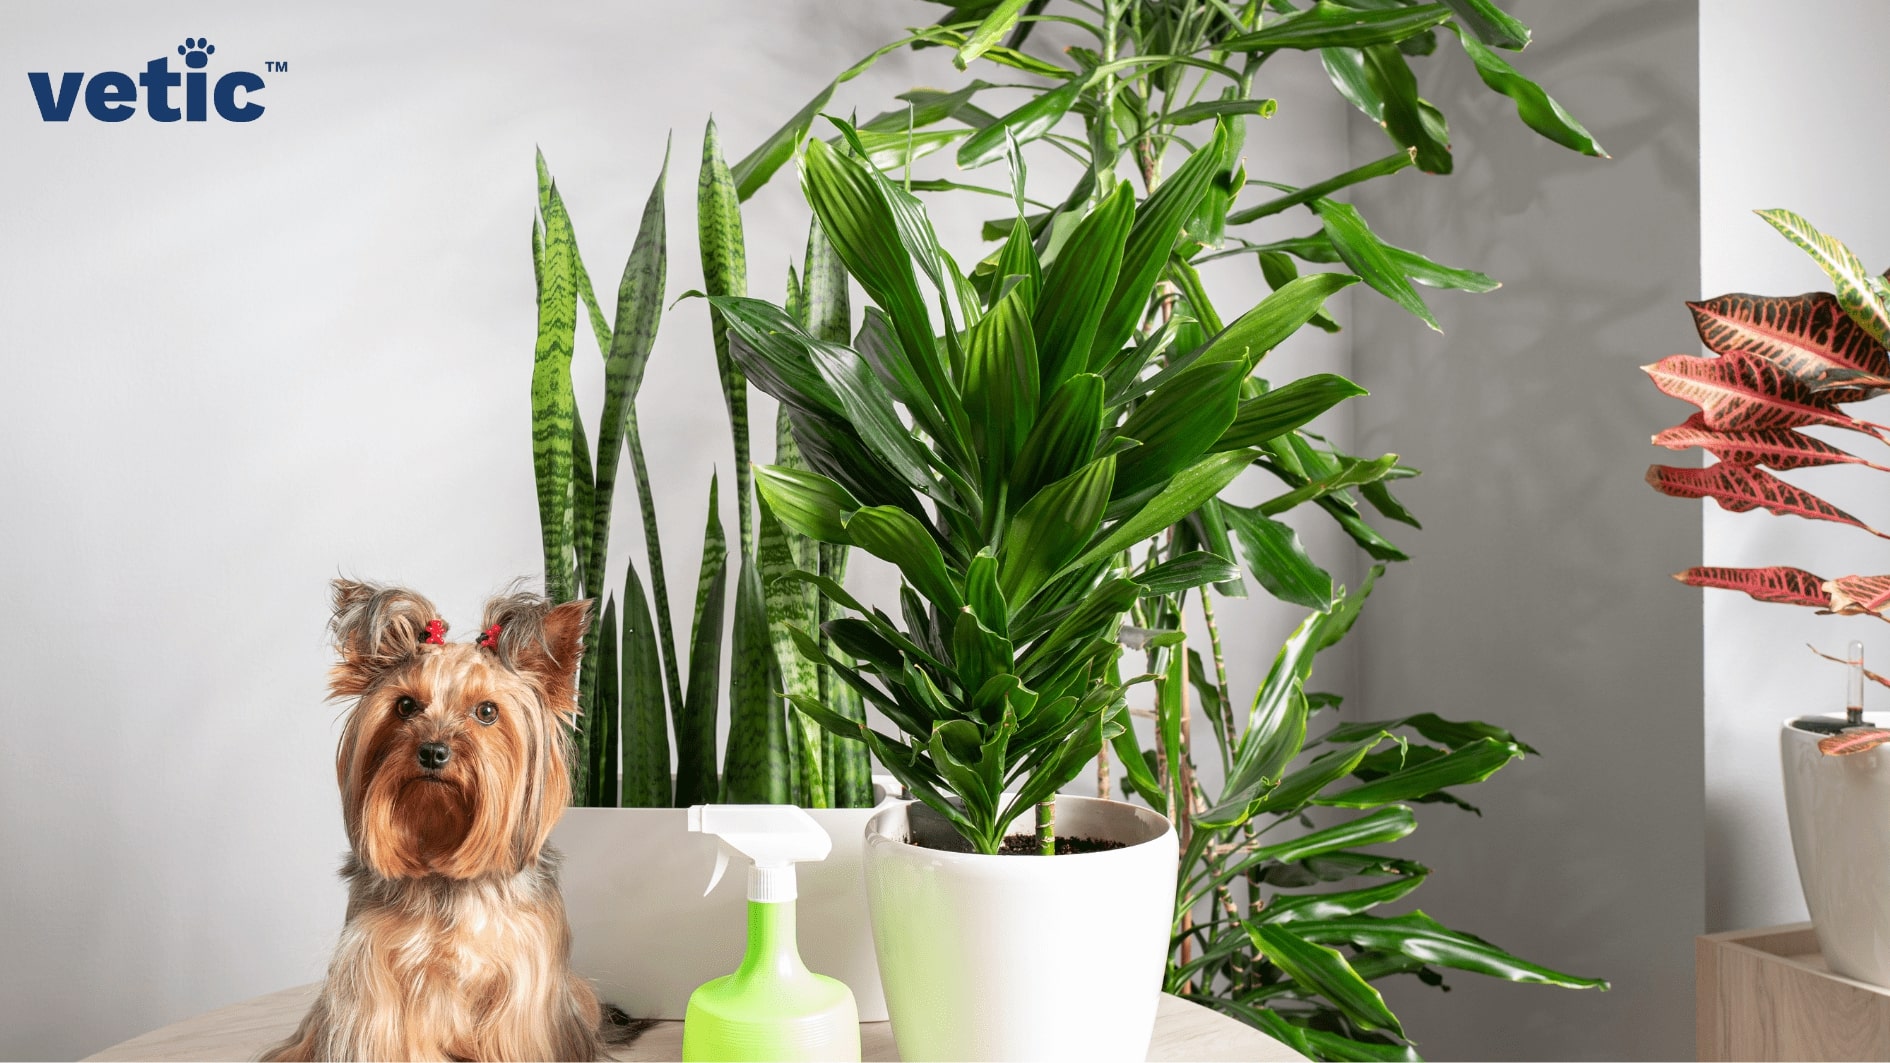 Shih Tzu sitting beside house plants and spray pesticides. chewing on toxic plants can easily cause loose motion in dogs.